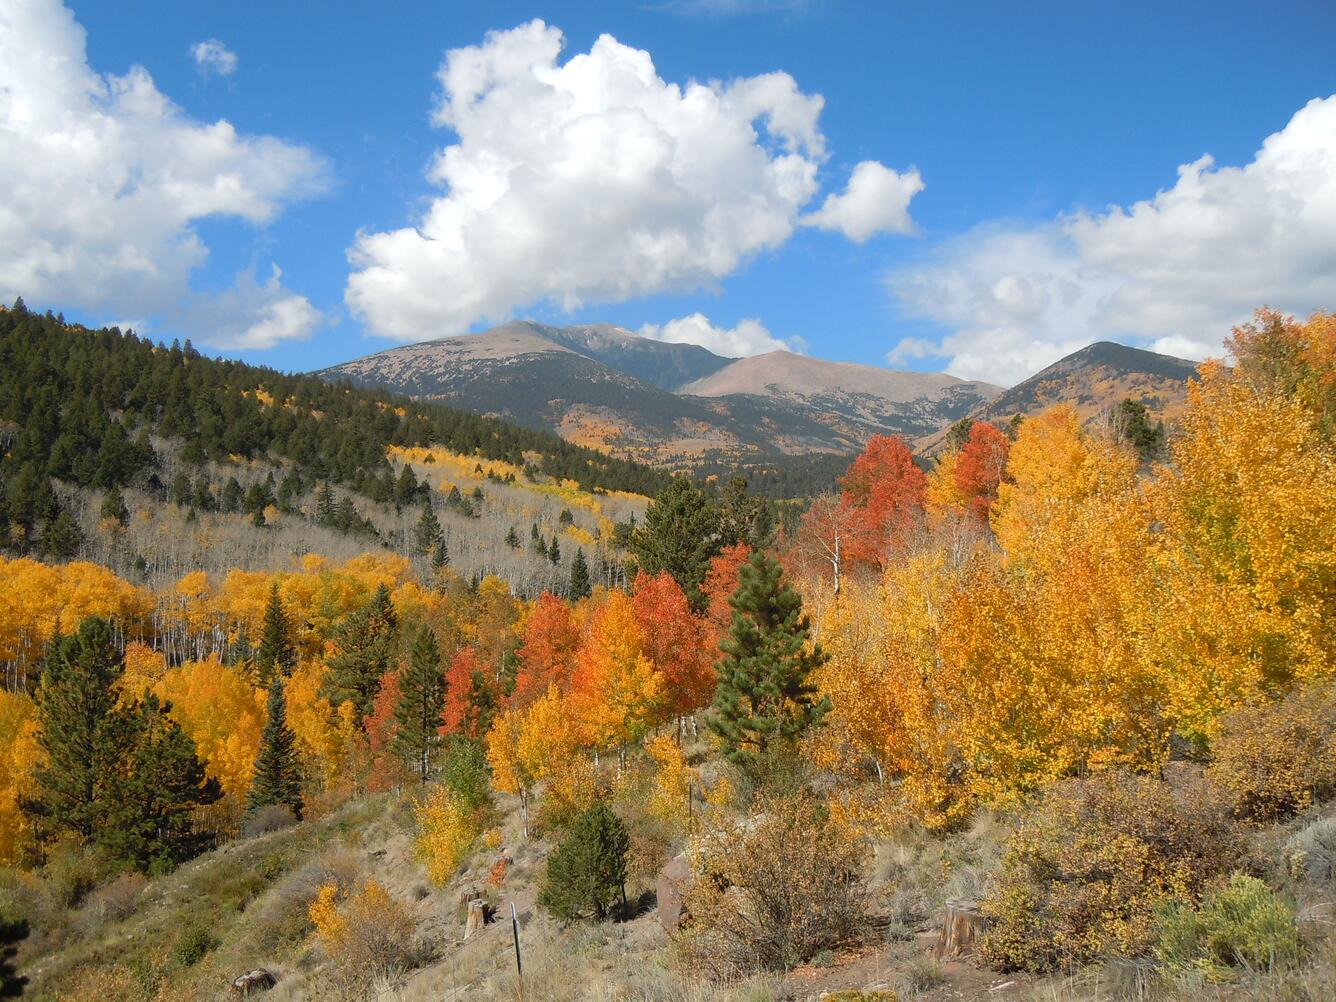 Mt. Ouray, Colorado with aspen colors